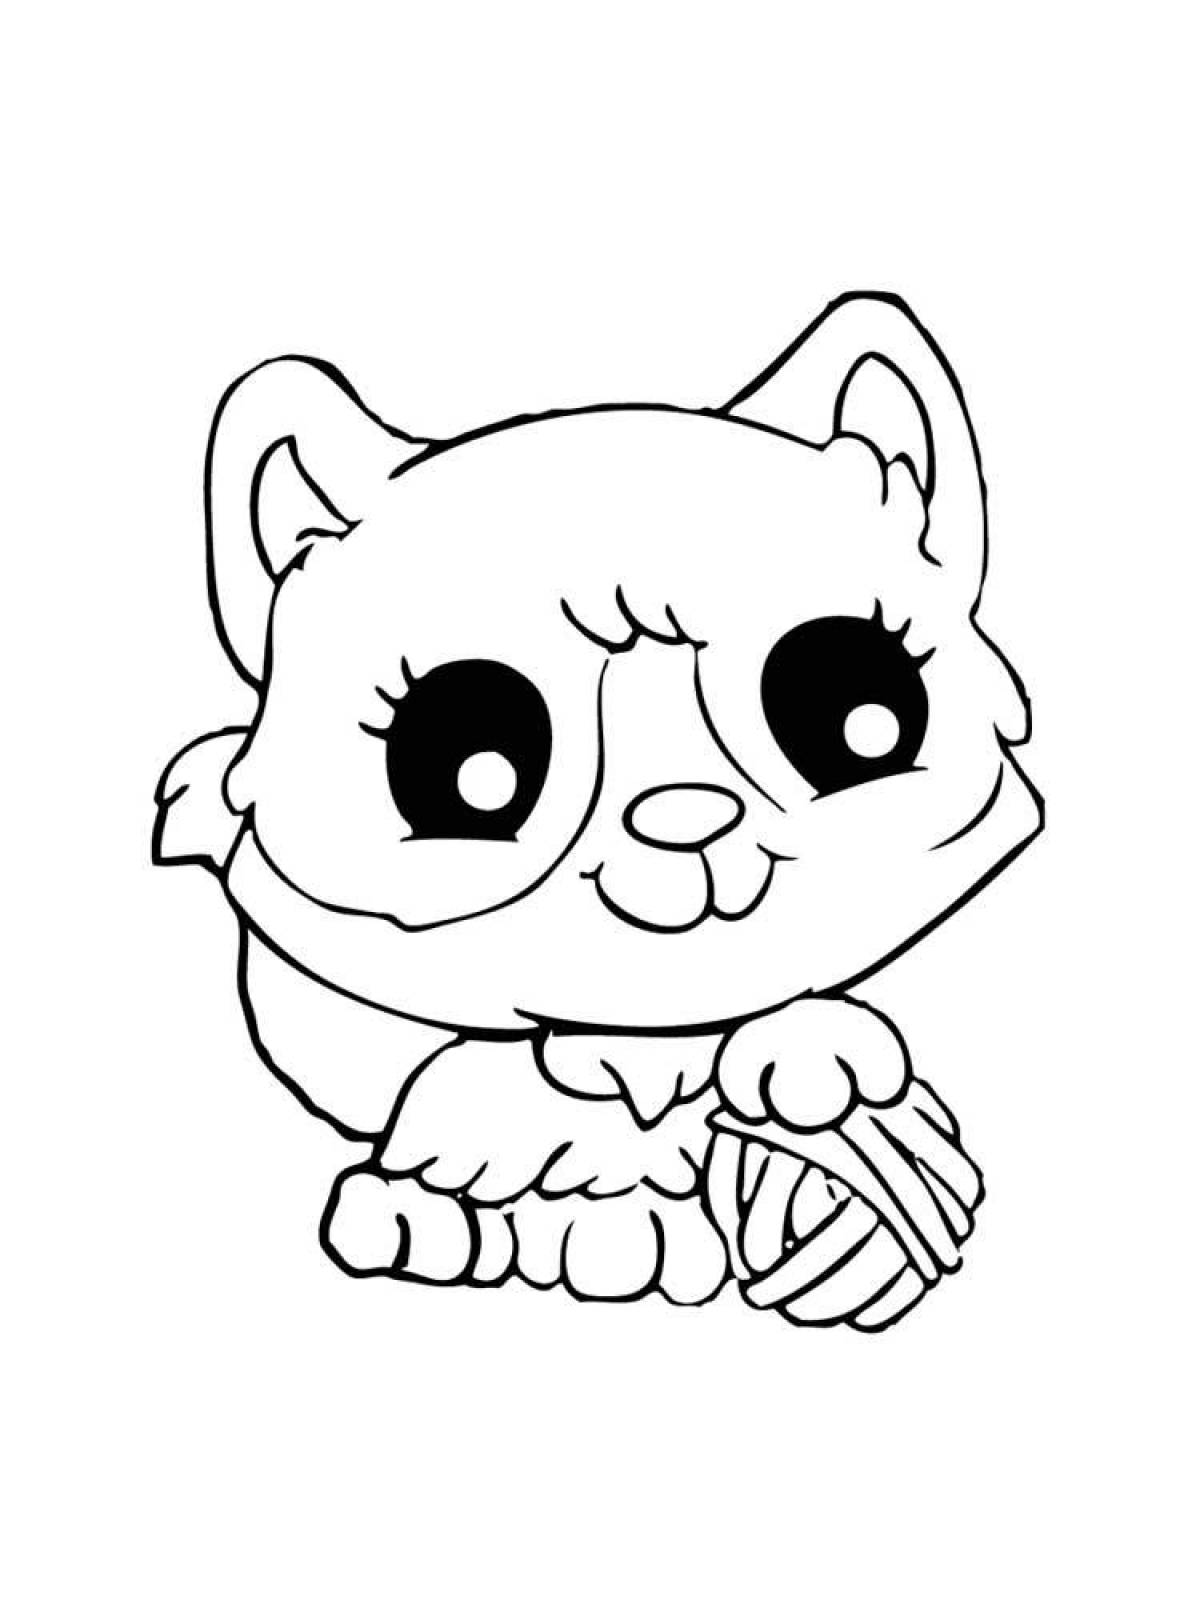 Unforgettable coloring pages for girls cute animals